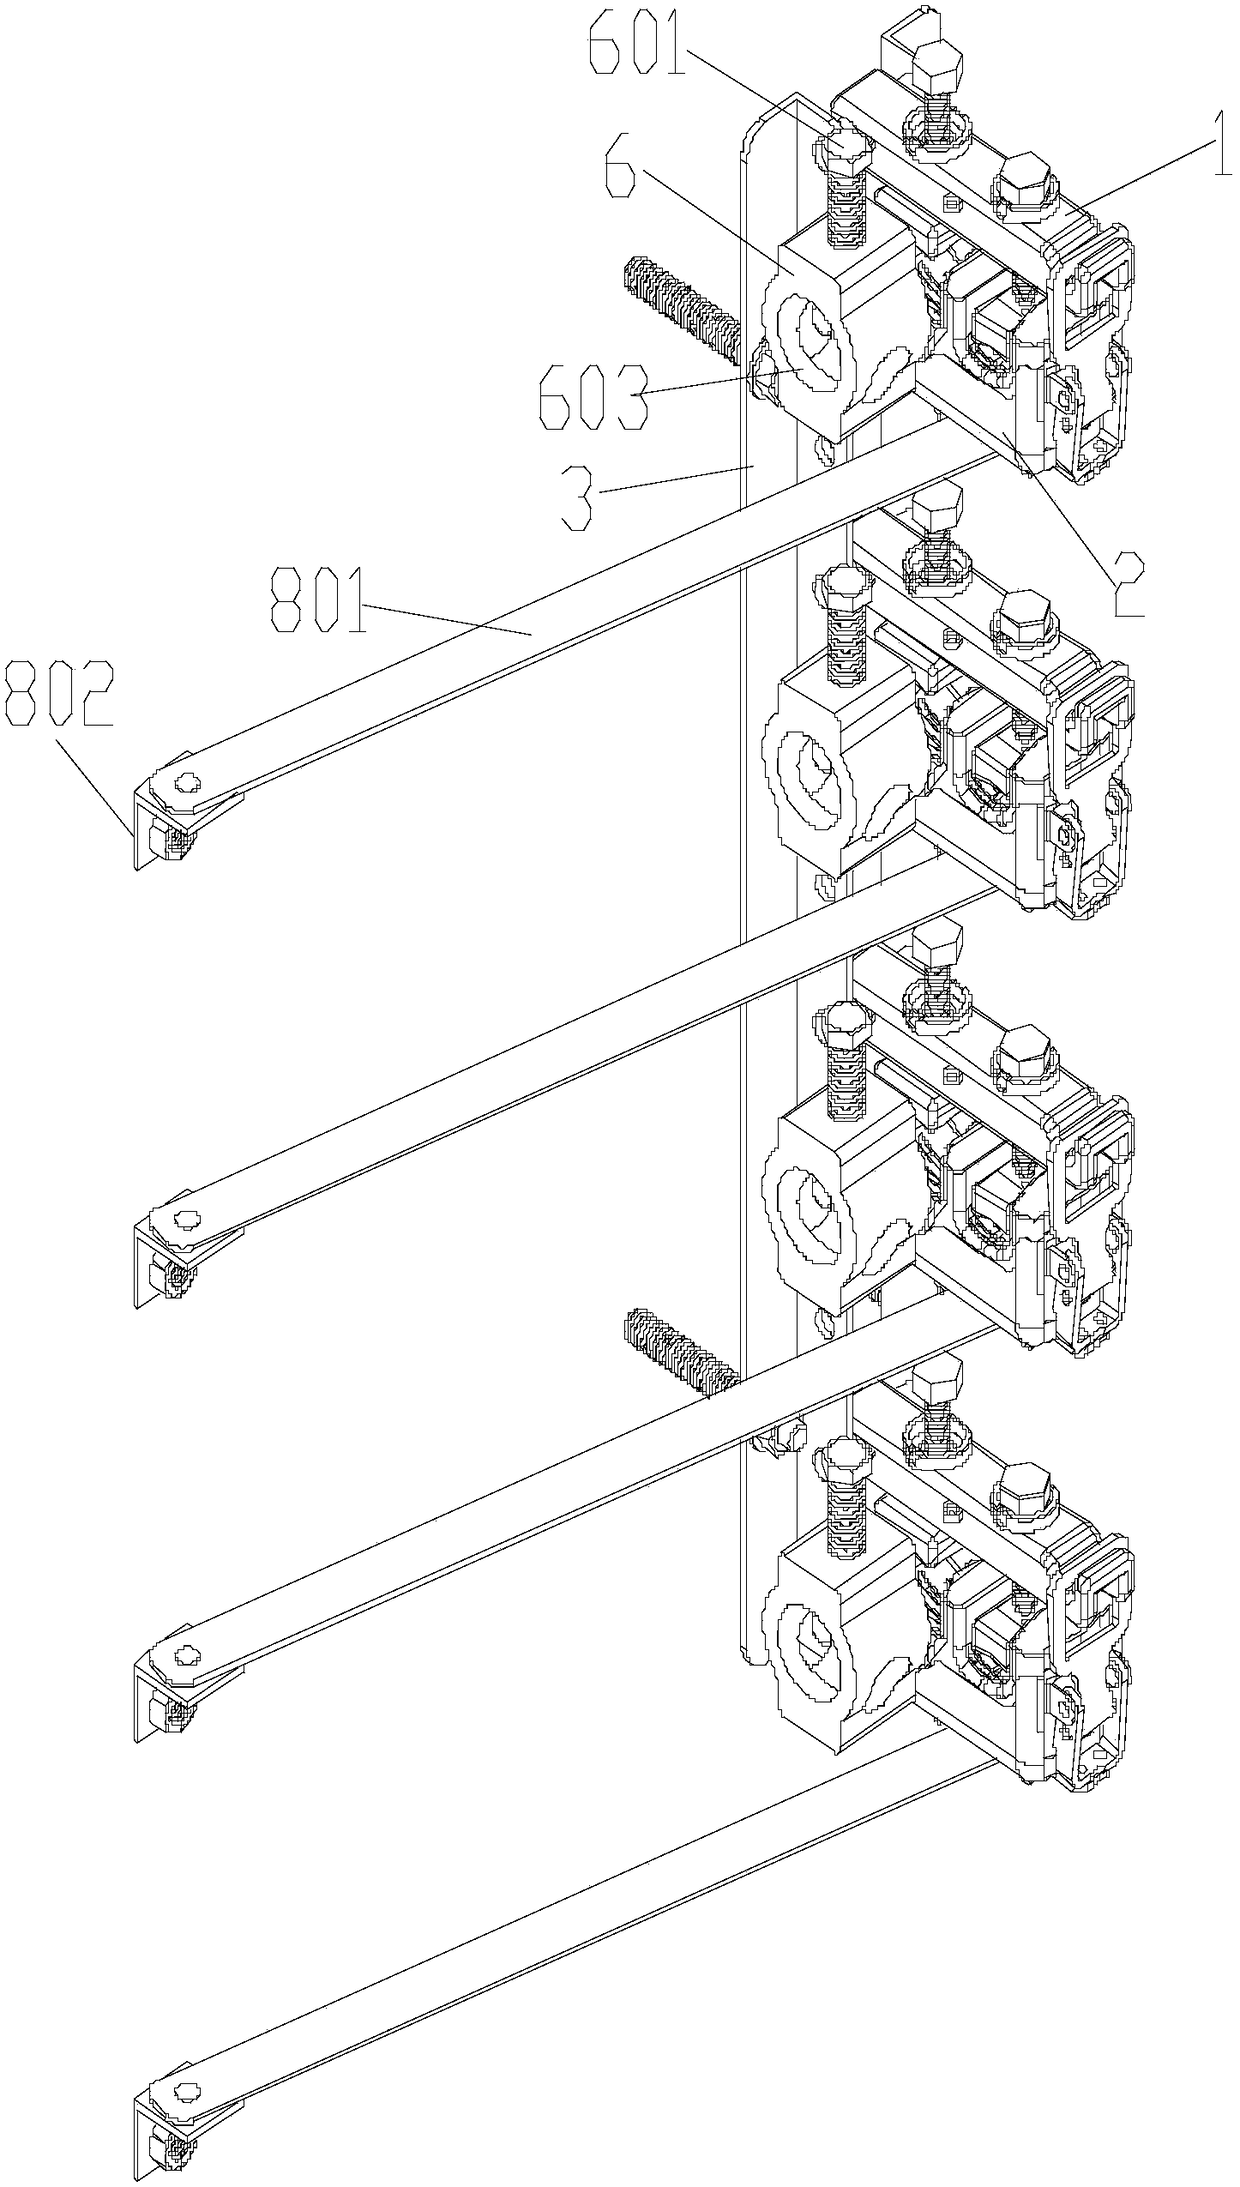 A terminal fixing device assembly